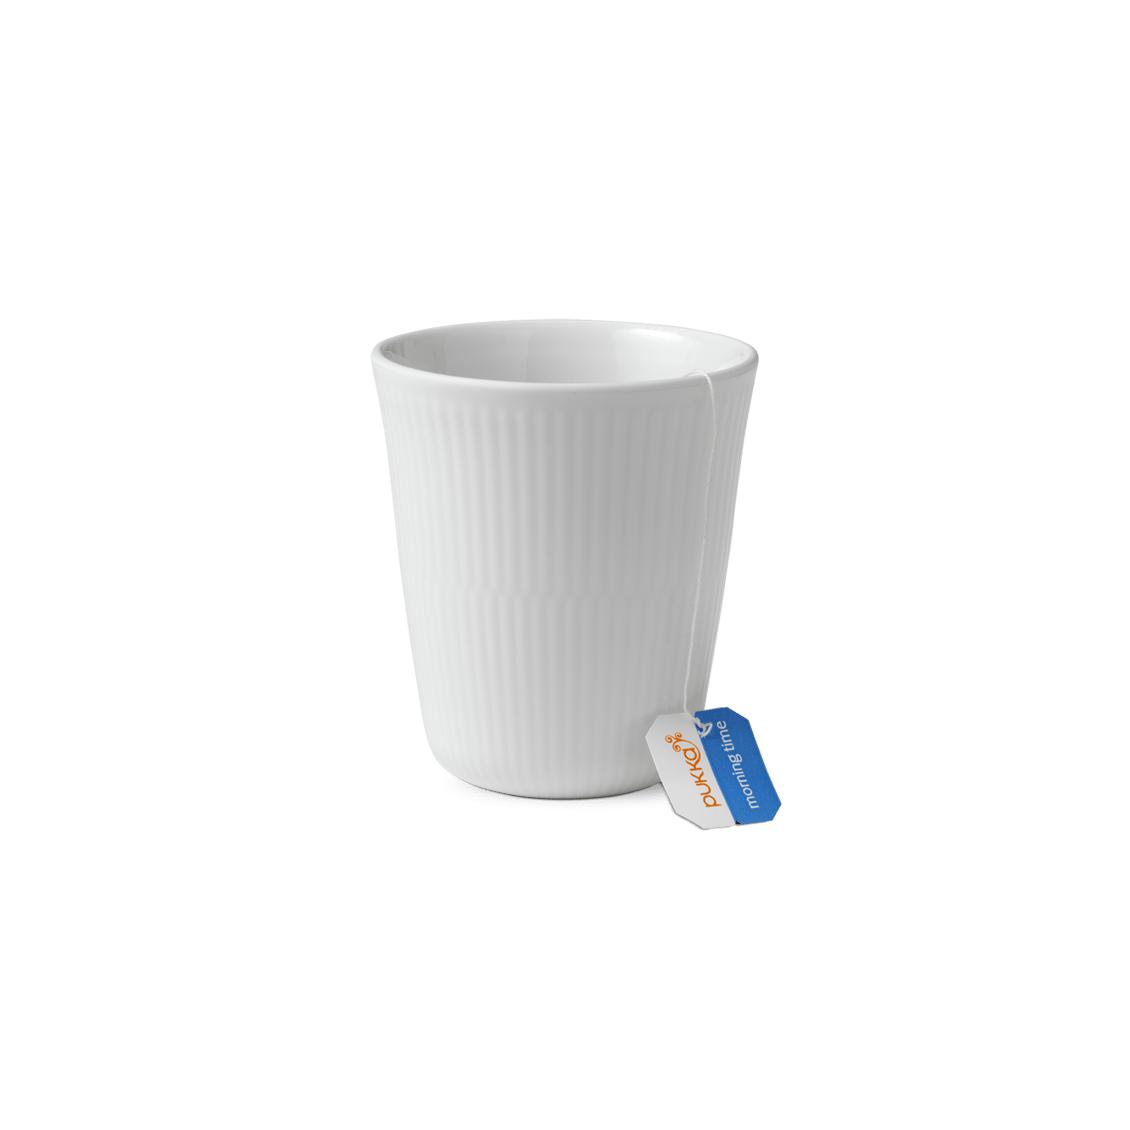 Royal Copenhagen Weißer Thermo -Thermo Becher, 29 cl